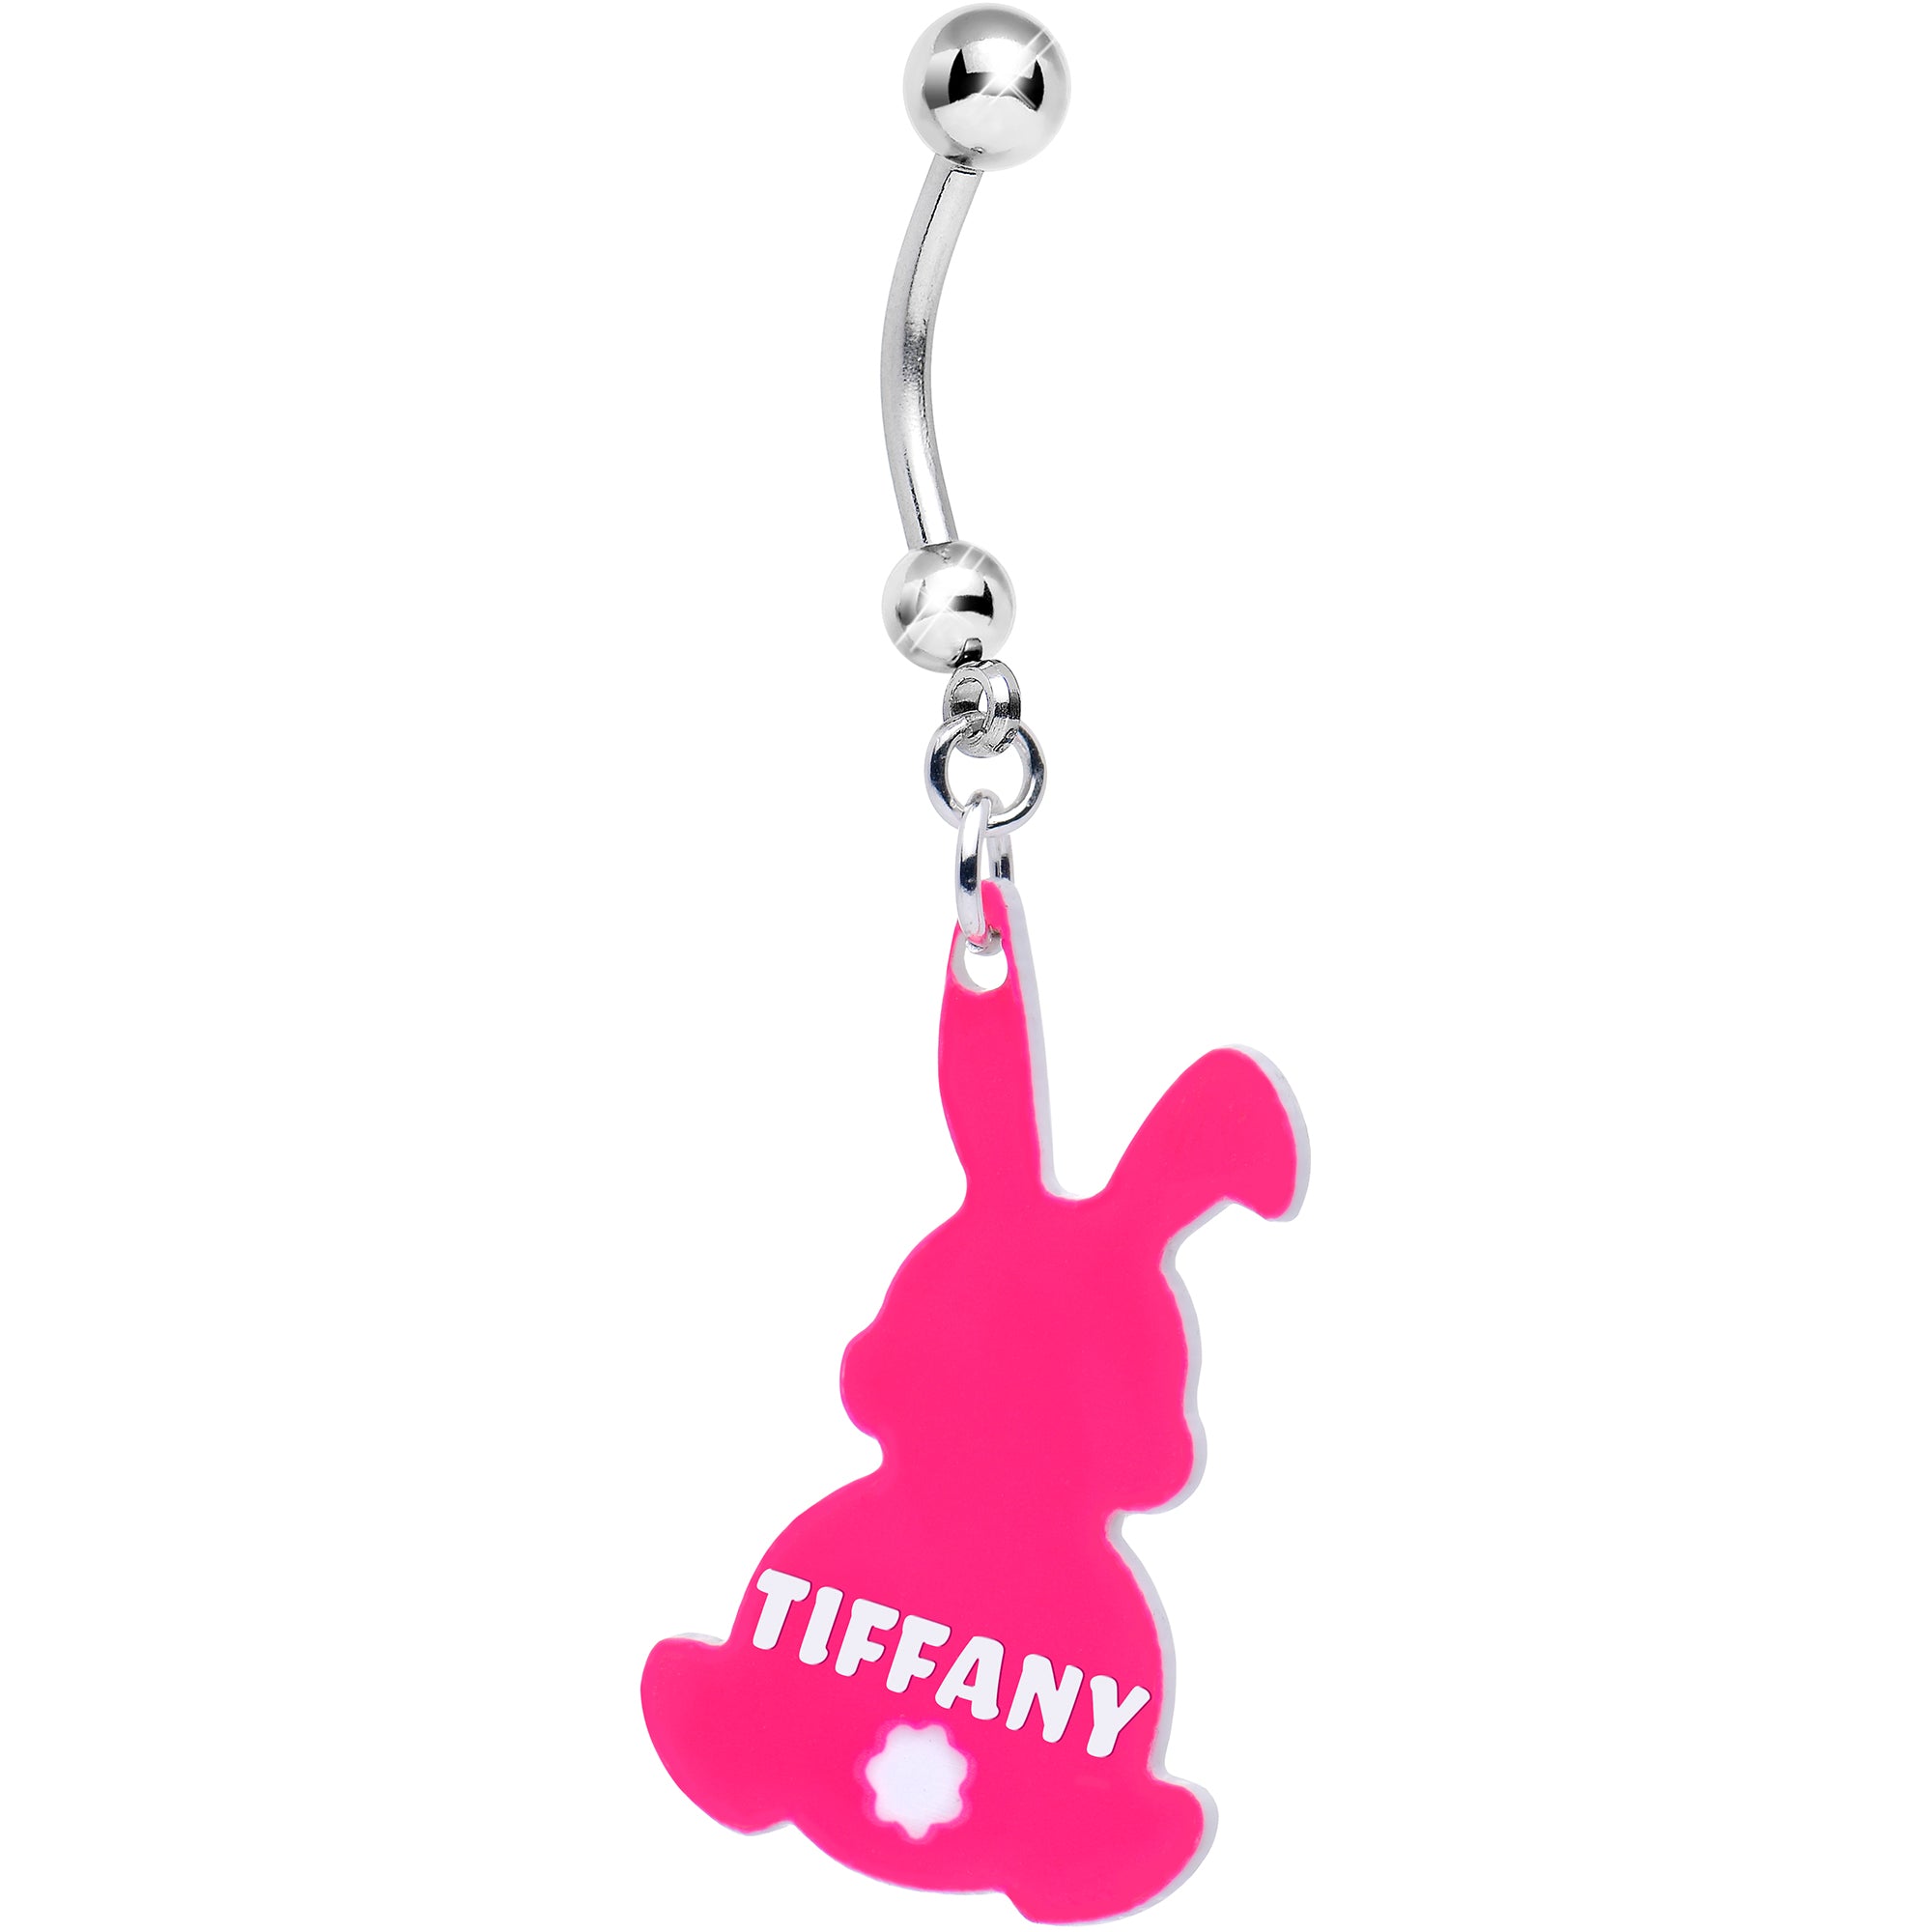 Custom Pink Bunny Rabbit Personalized Dangle Belly Ring